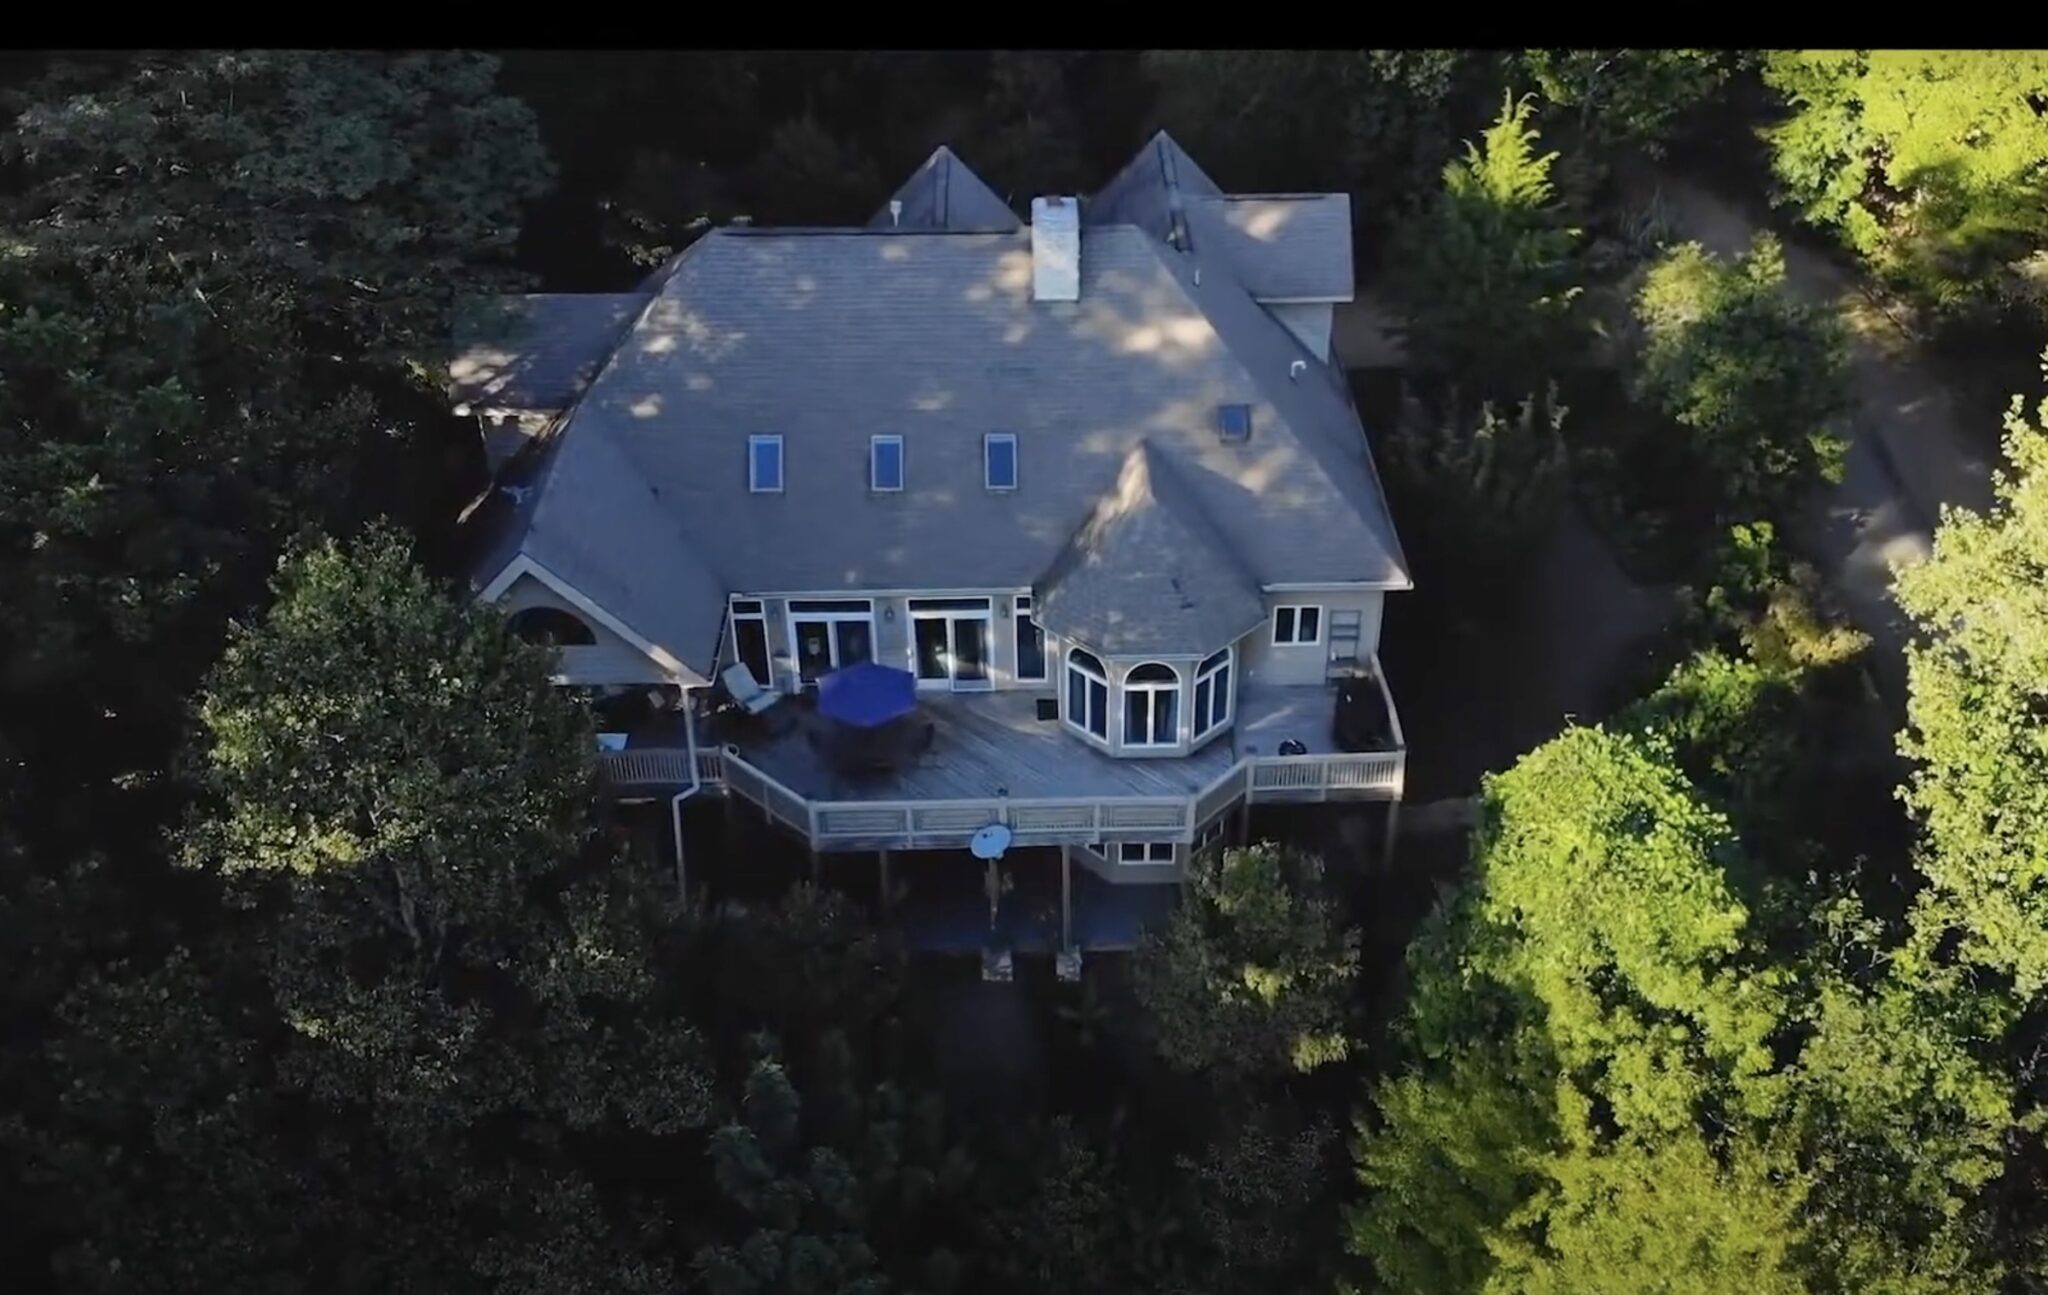 A luxury vacation rental in Ashville, North Carolina. Source: TravelNet Solutions/YouTube https://www.youtube.com/watch?v=Rf0l1fM_A44